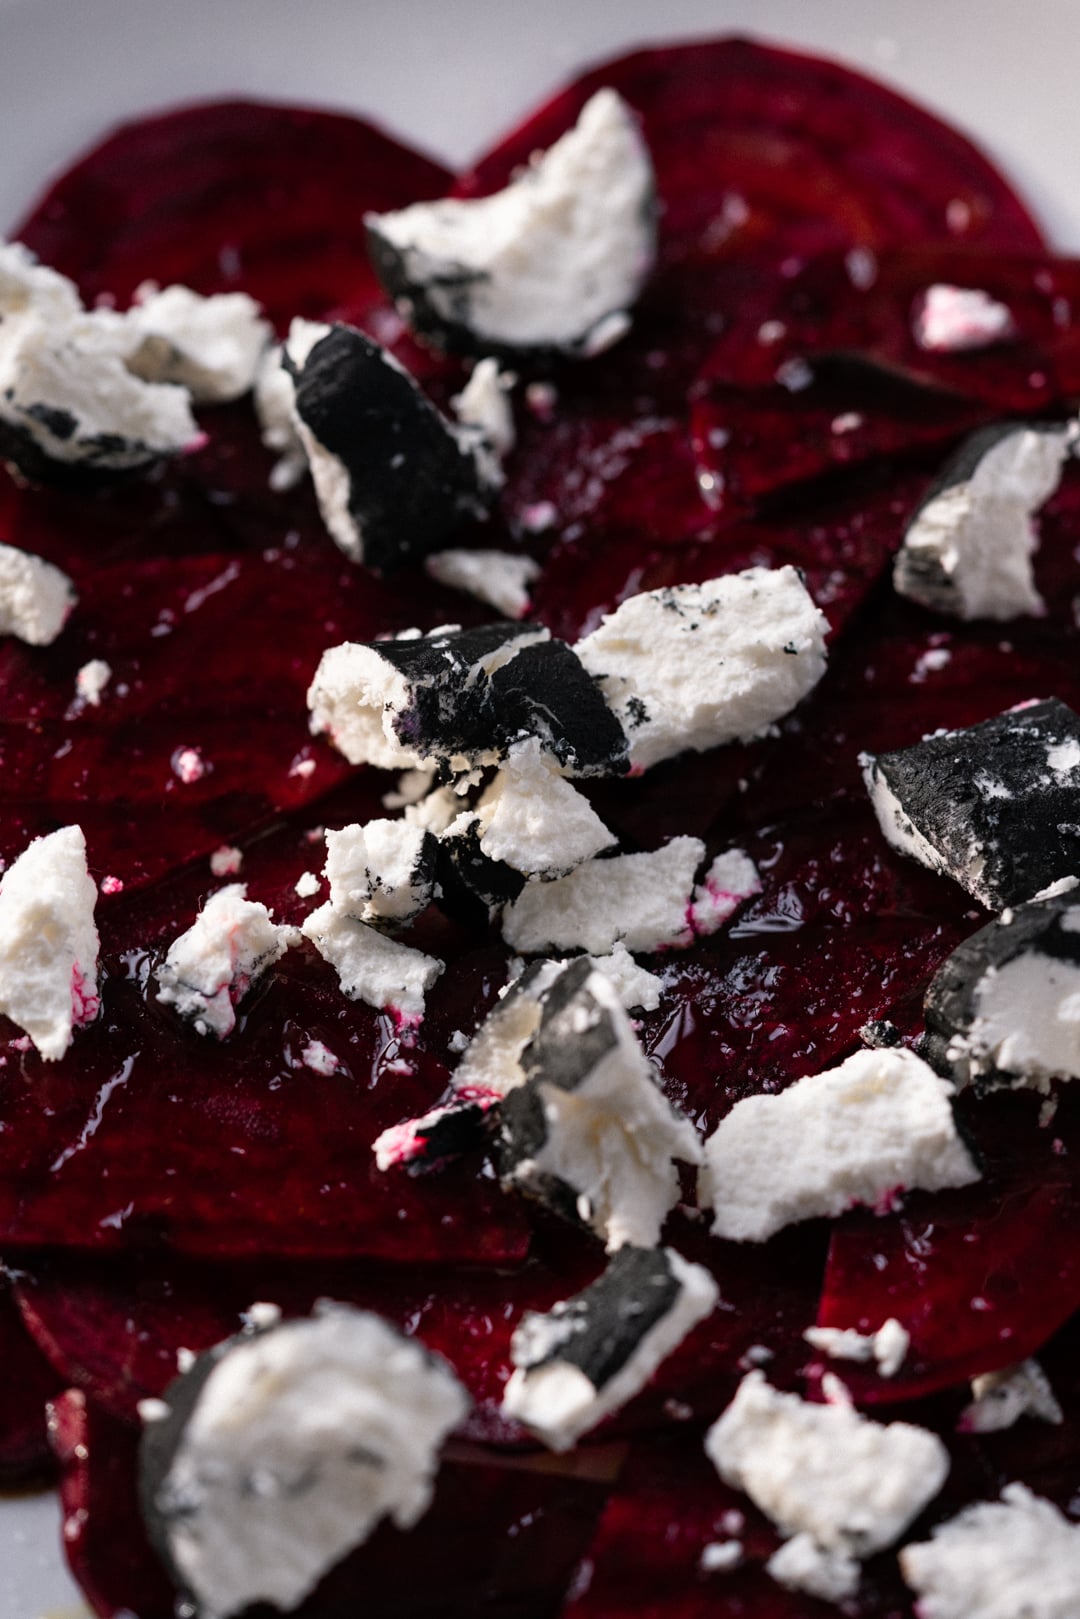 Crunchy Beet Salad With Goat Cheese And Pine Nuts